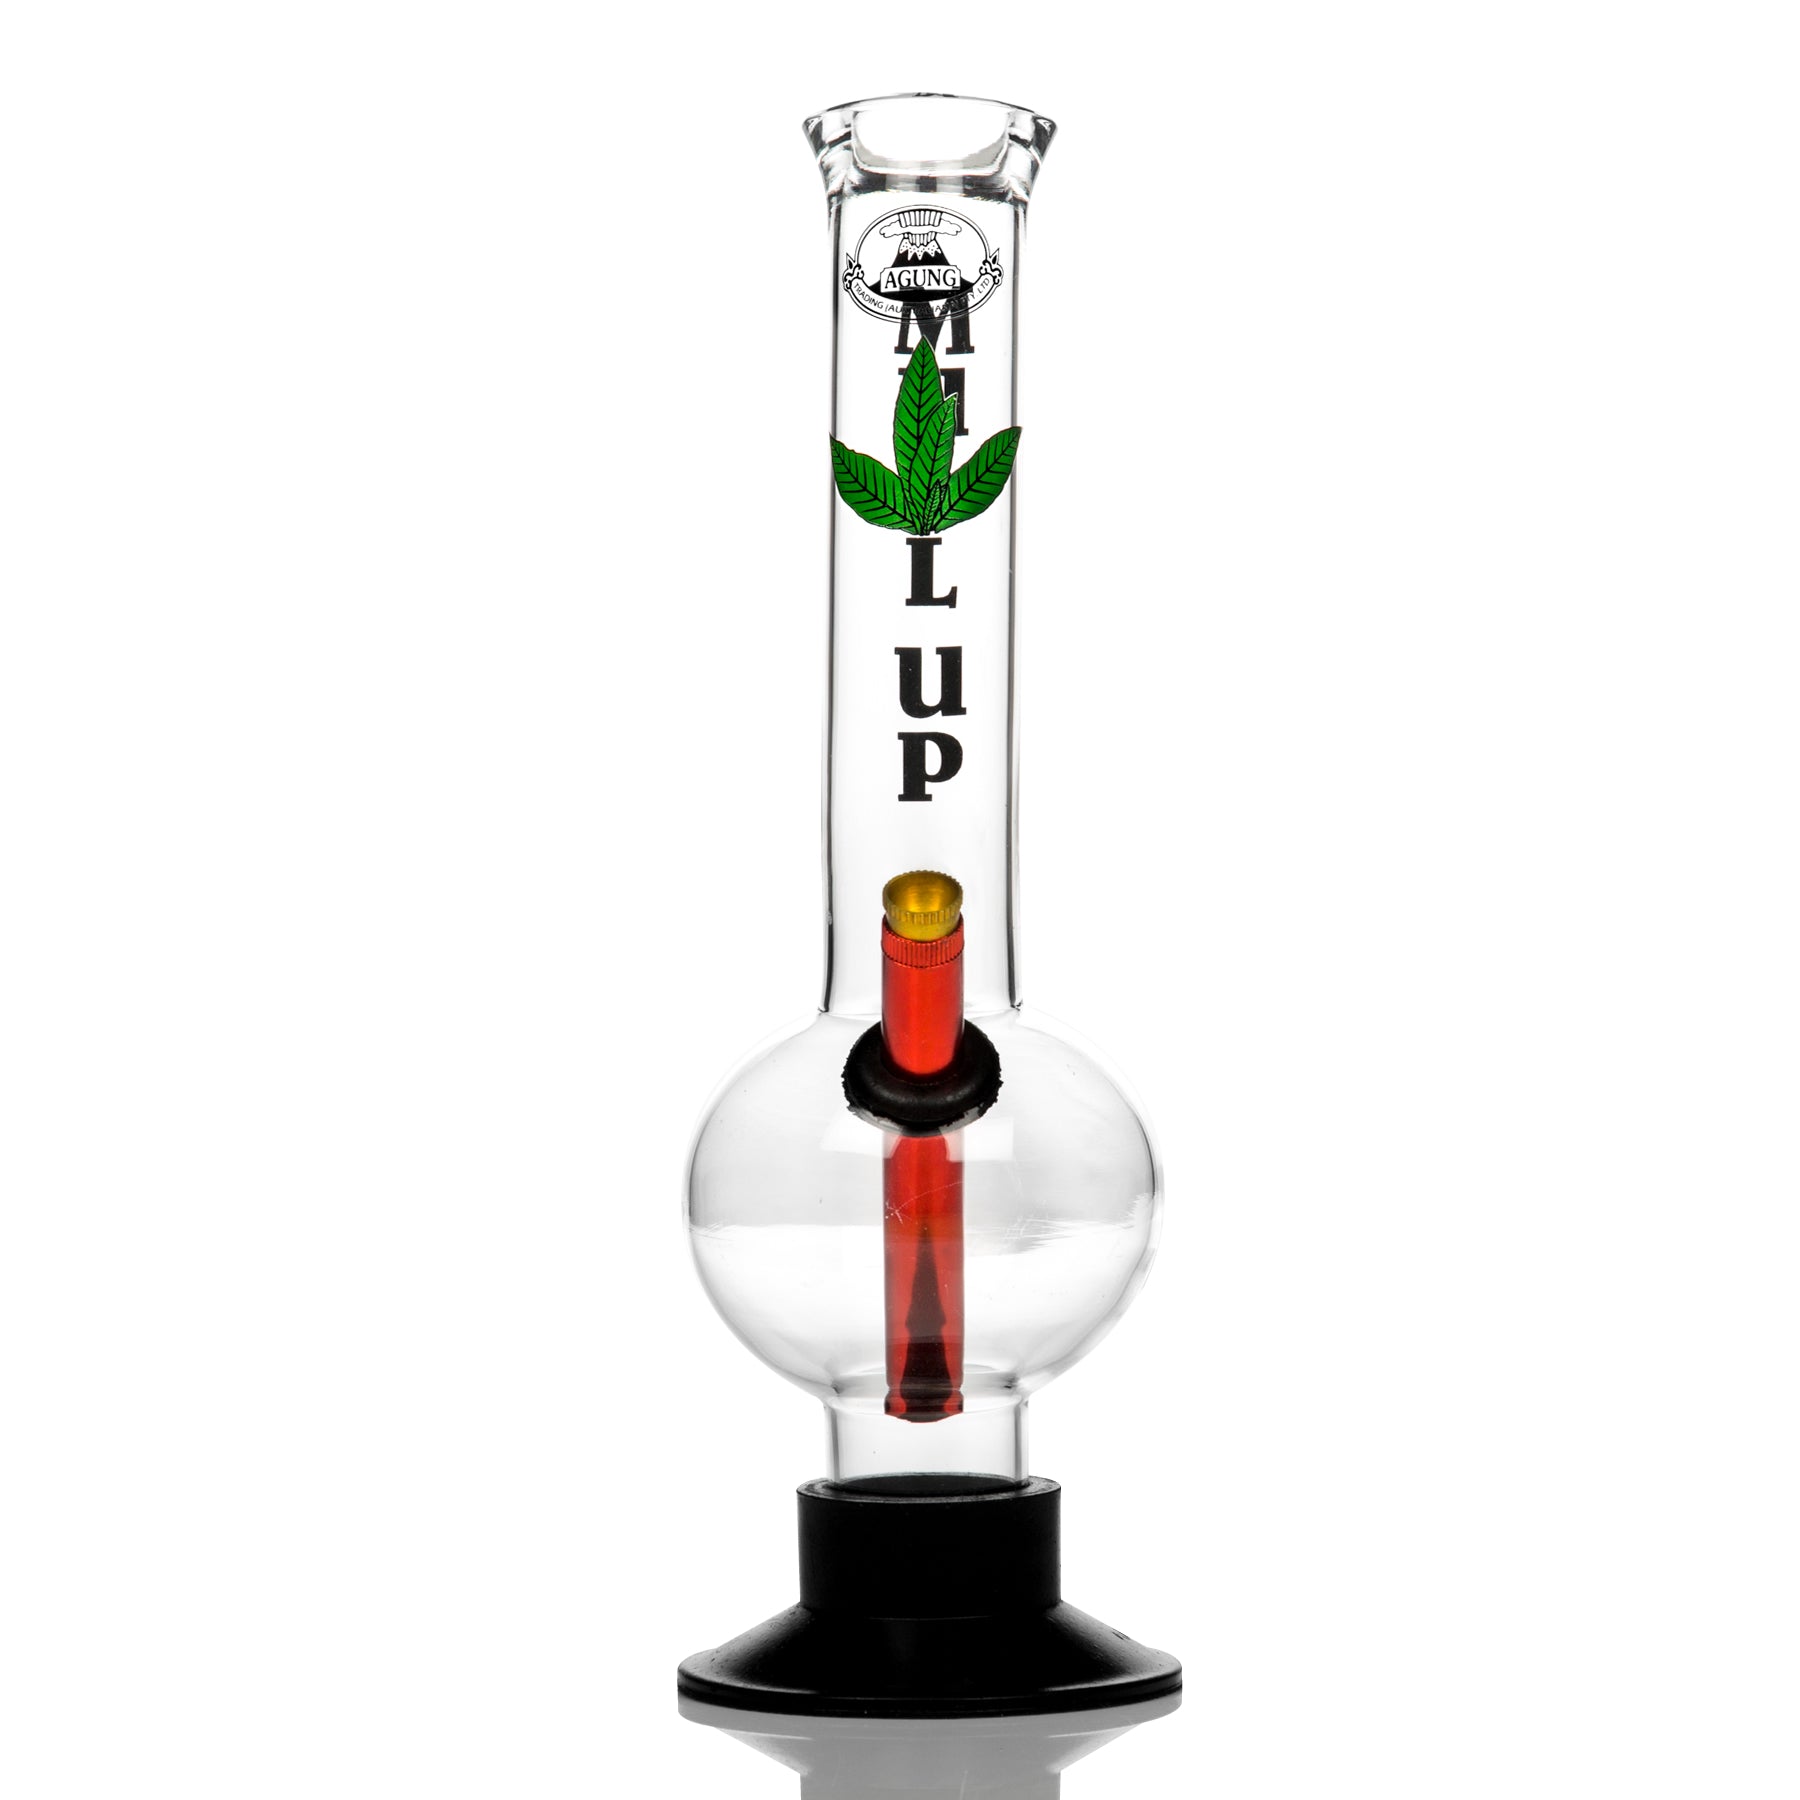 Aussie style Agung glass bong with Mull Up and a cannabis leaf dcal.